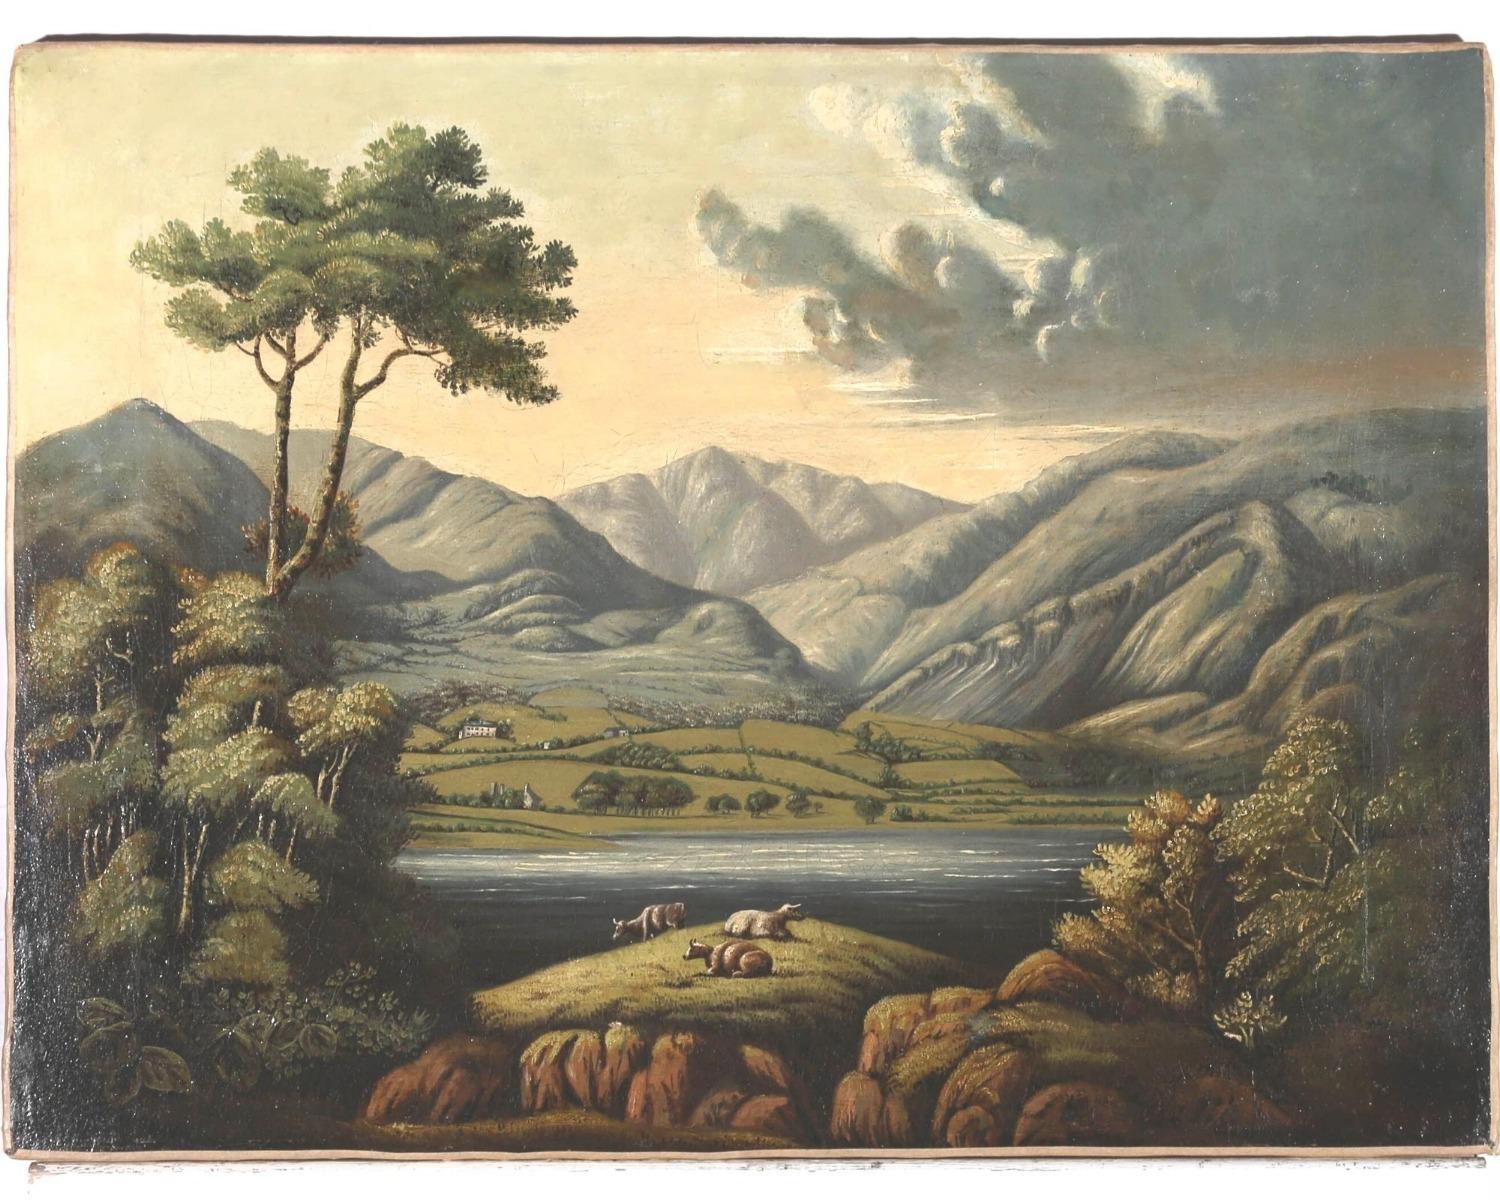 Unknown Landscape Painting - Early 19th Century Oil - Dramatic Mountain Landscape